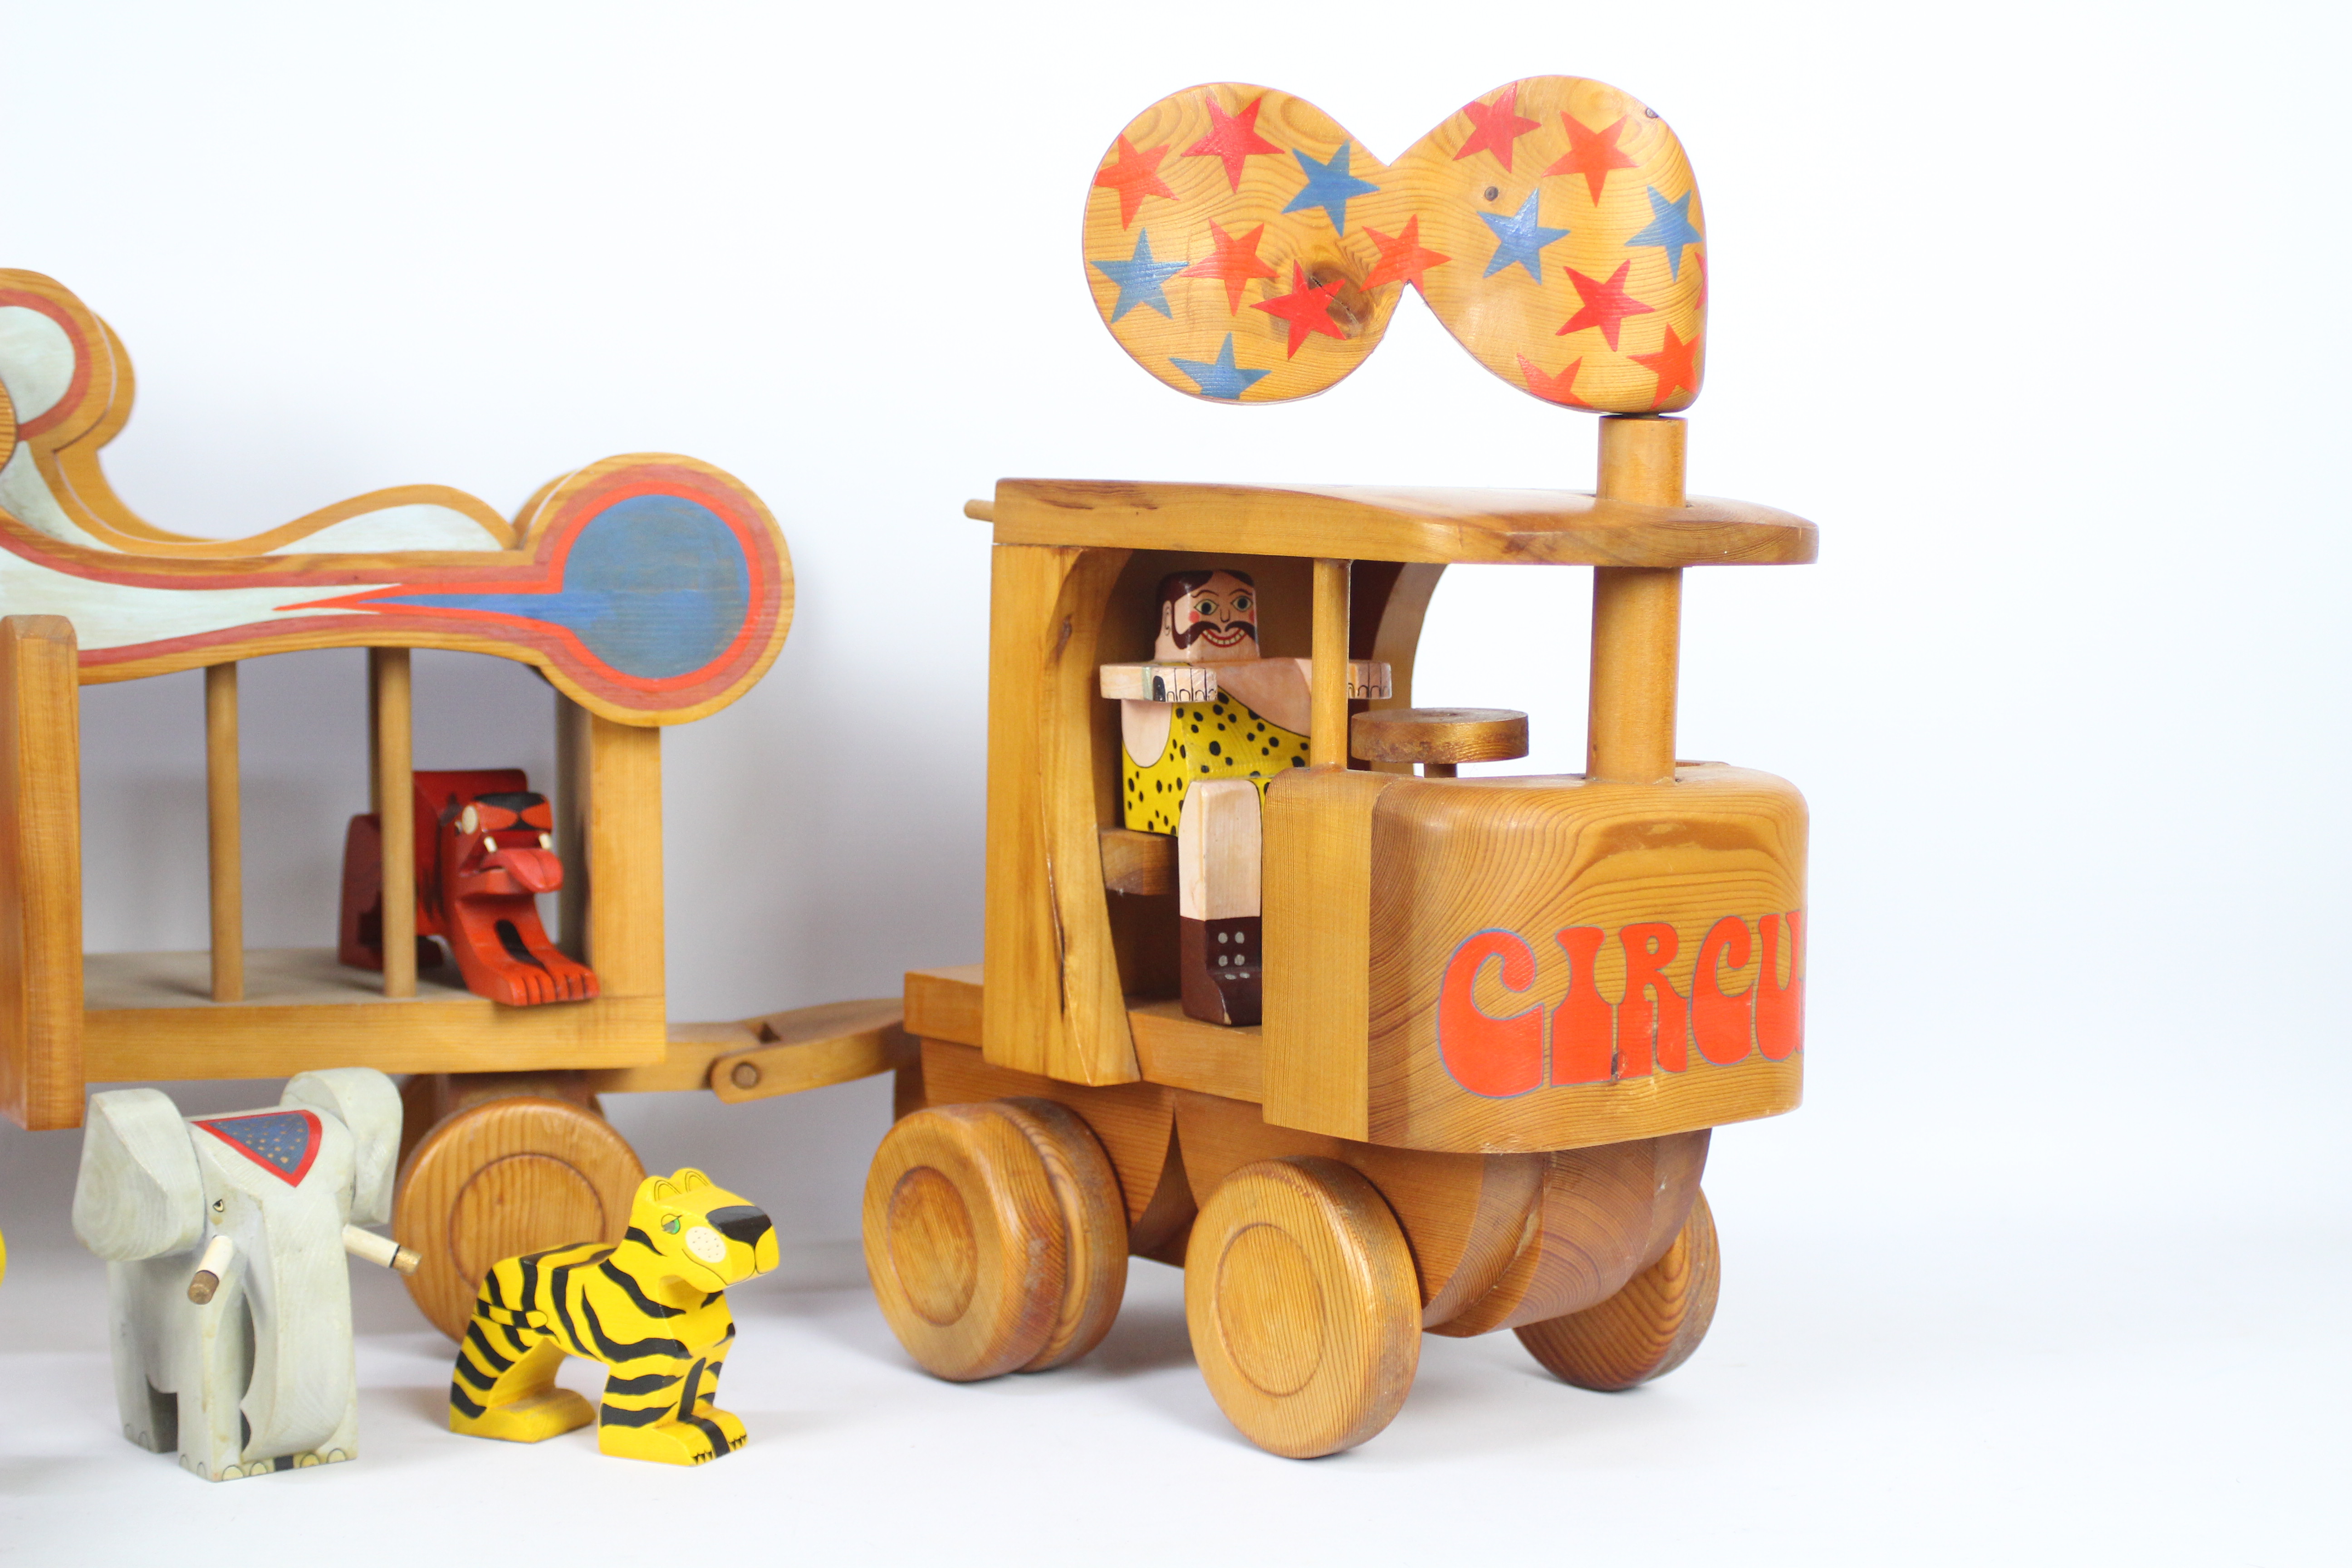 Frank Egerton - A rare hand crafted wooden Circus Lorry and Trailer complete with driver figure and - Image 8 of 9